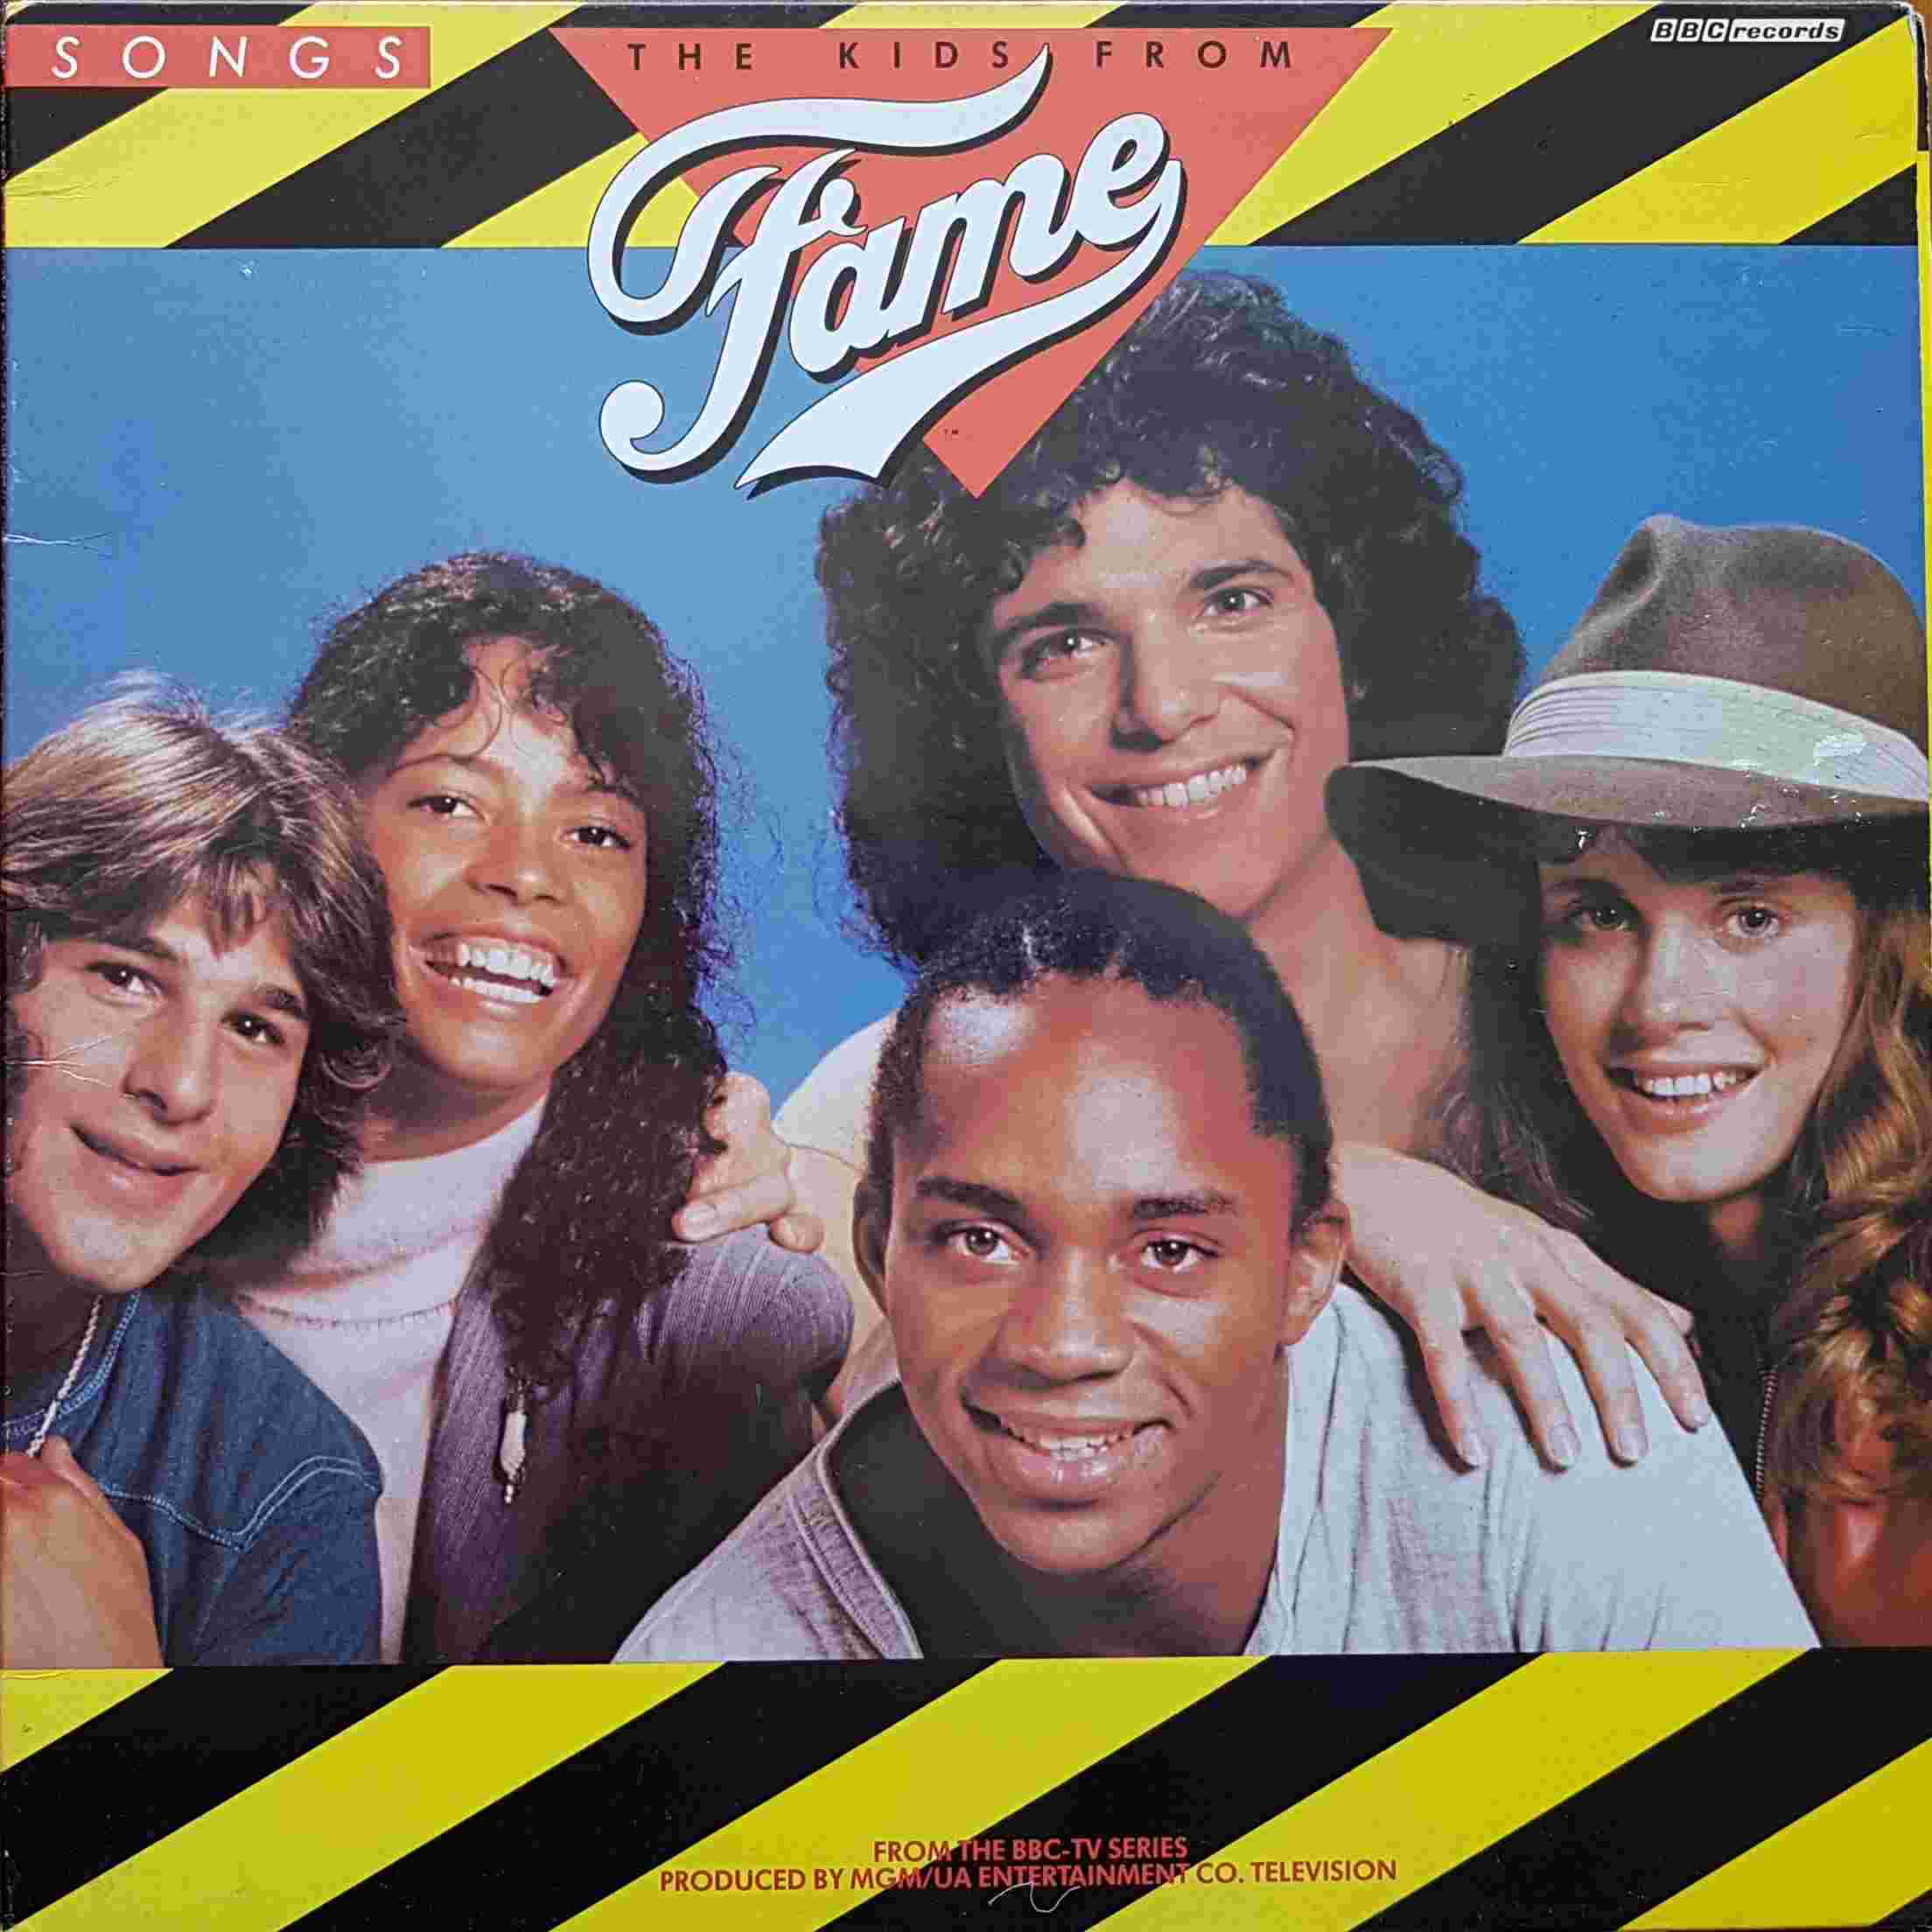 Picture of KIDLP 004 The kids from fame - Volume 4 by artist Various from the BBC albums - Records and Tapes library